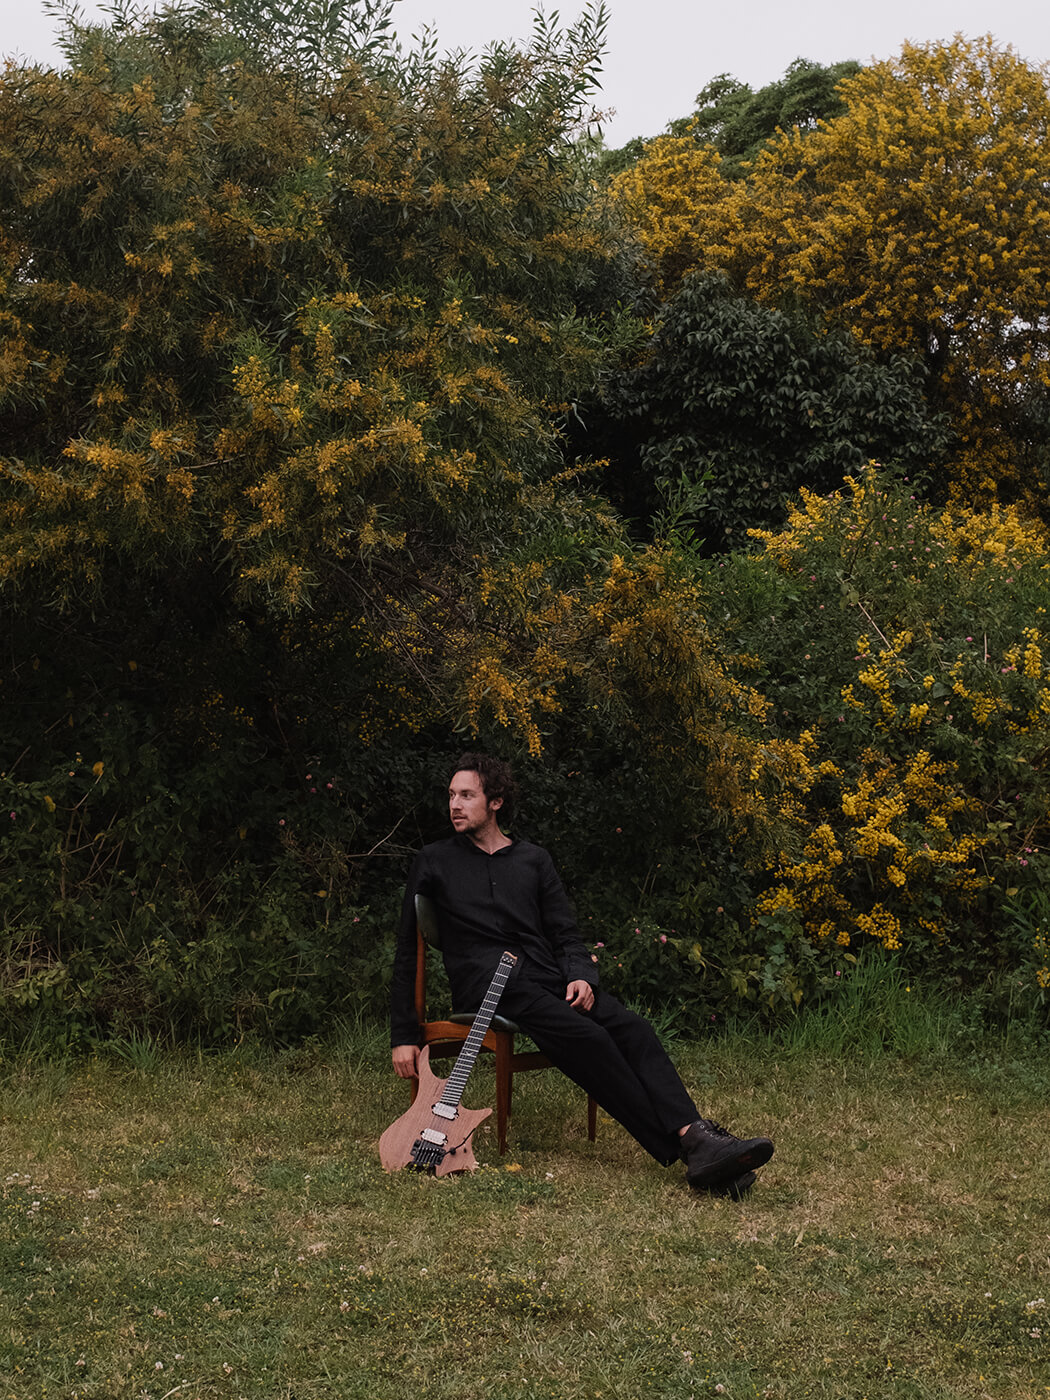 Plini seated on a chair with his Strandberg guitar in a field with trees, photo by Chad Dao